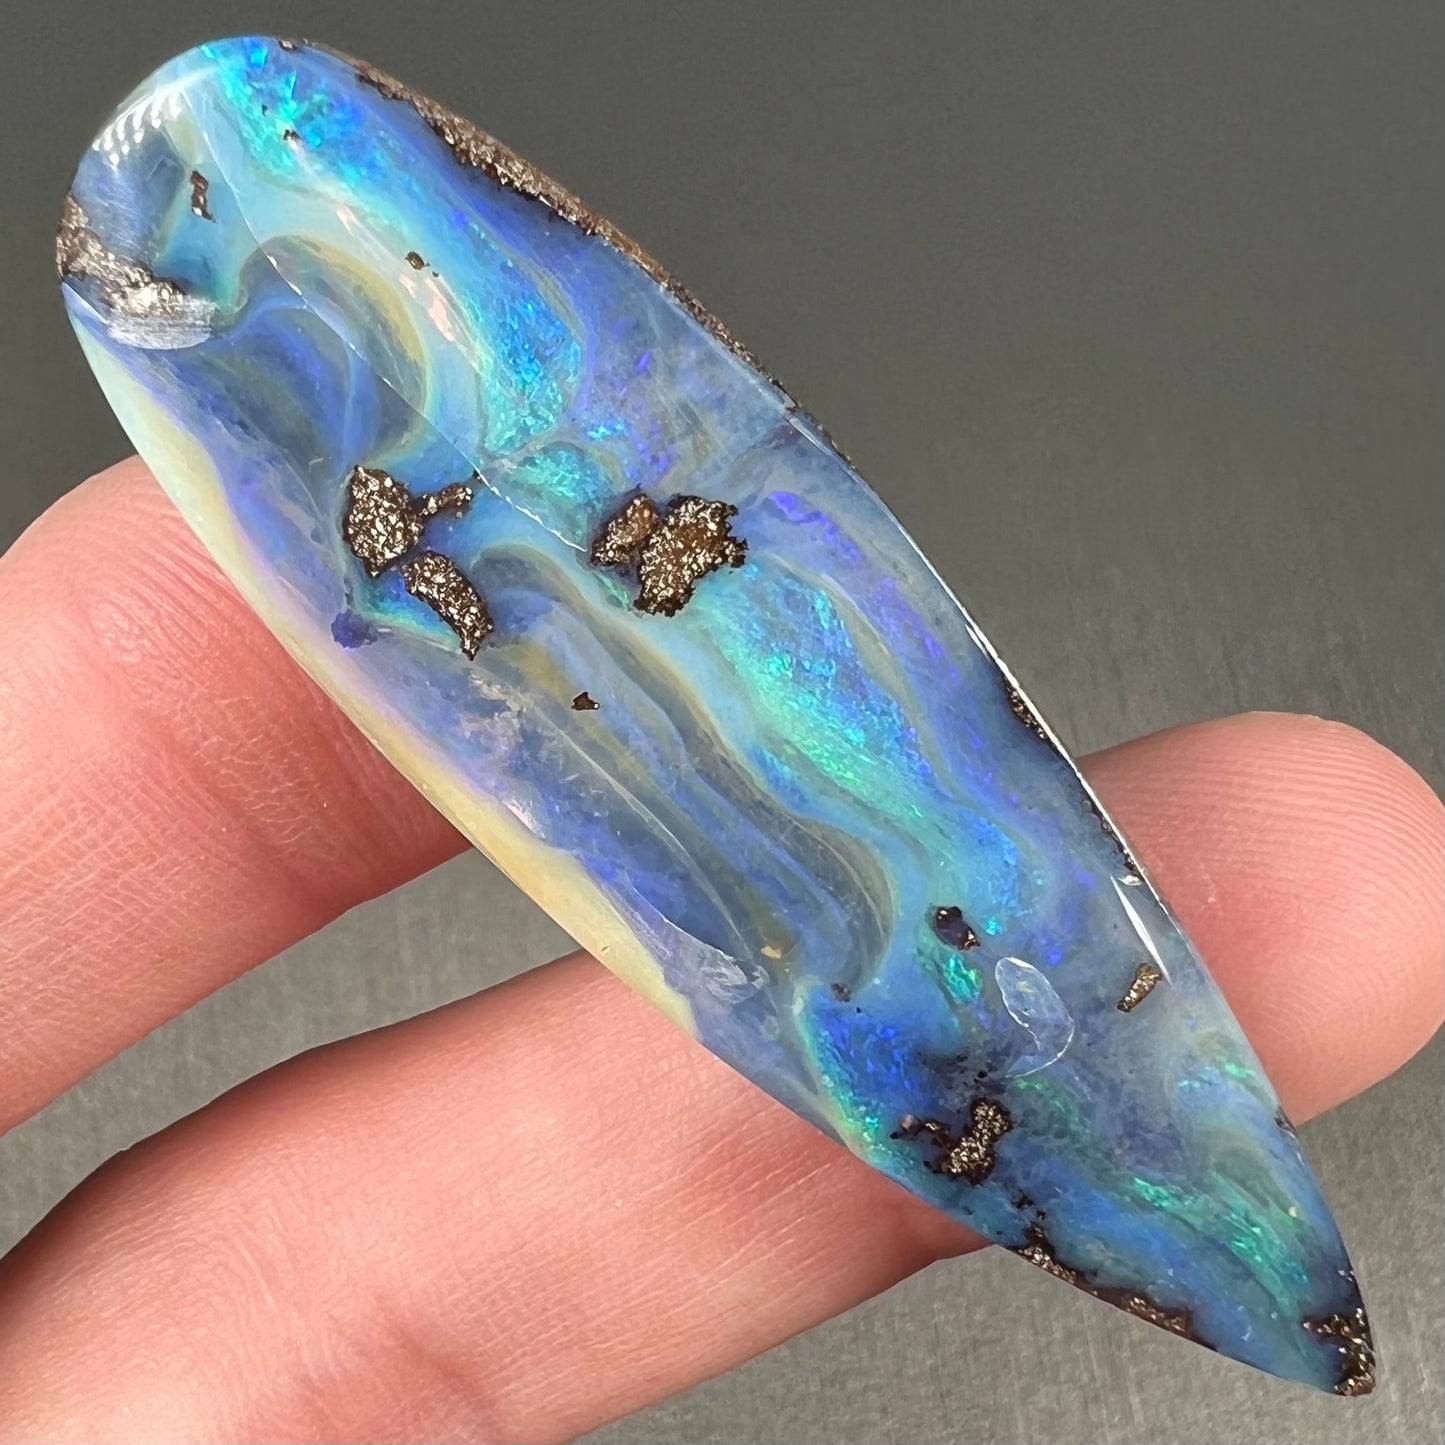 A blue, drop shaped Quilpie boulder opal stone from Queensland, Australia.